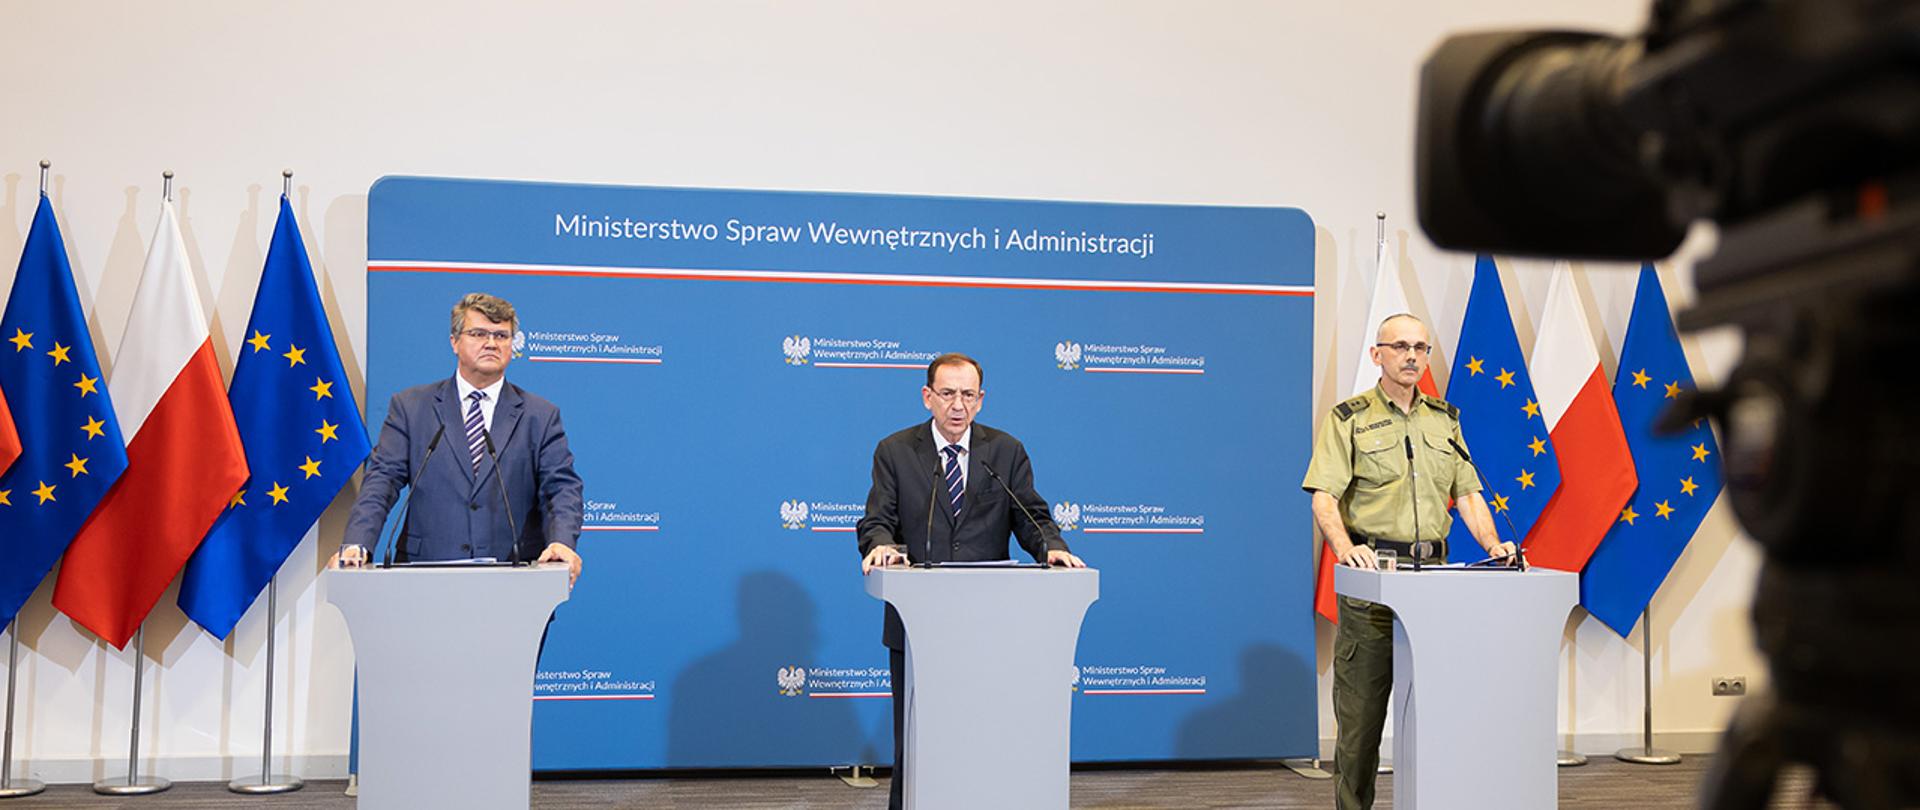 Press briefing of the Ministry of the Interior and Administration leadership on the temporary reinstatement of border checks at the Polish-Slovak border